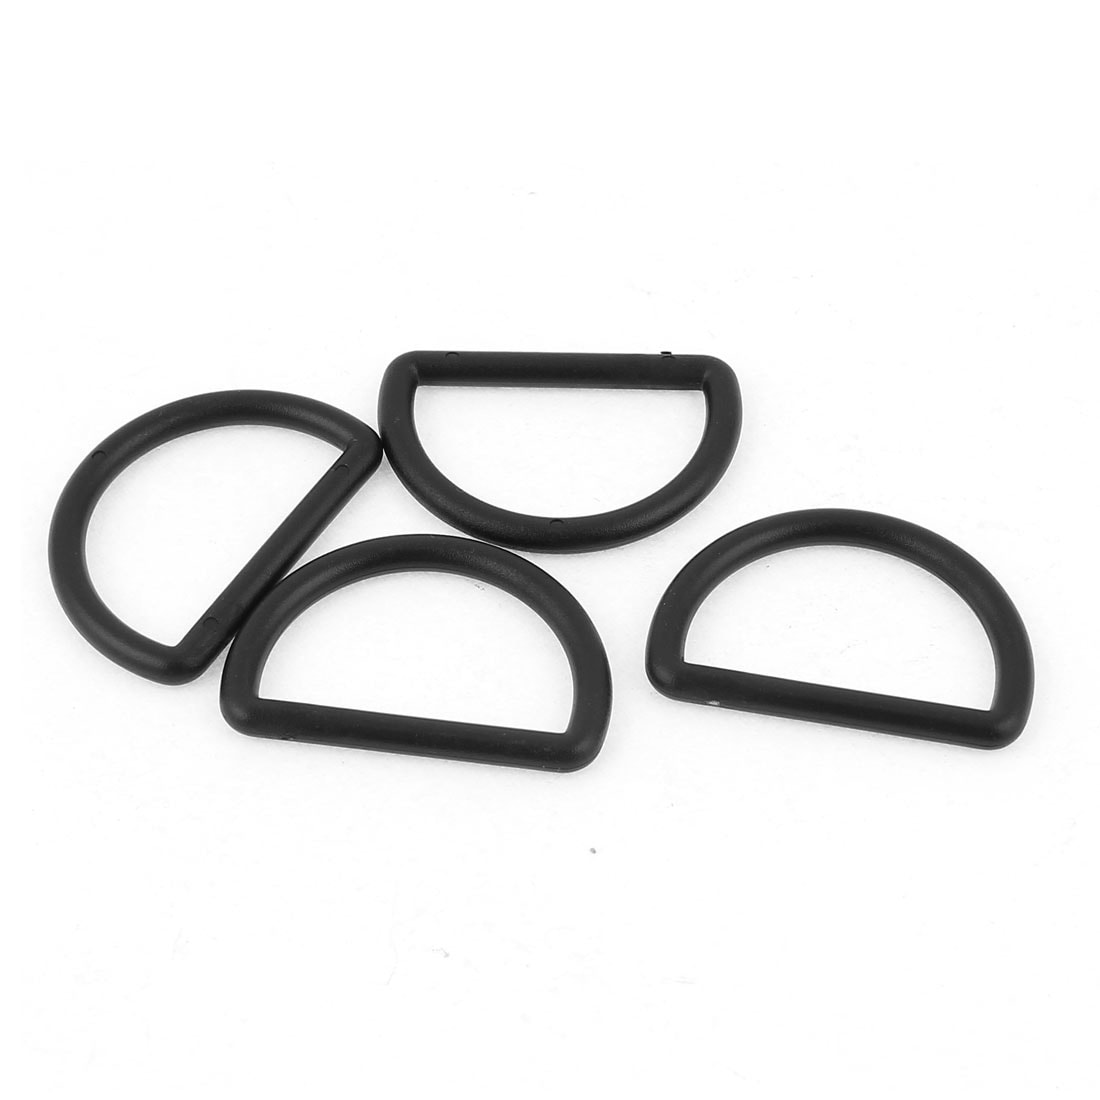 Home Buckles 25mm Black Plastic Round D Ring Bags Buckle For Handbag Backpack Pack Of